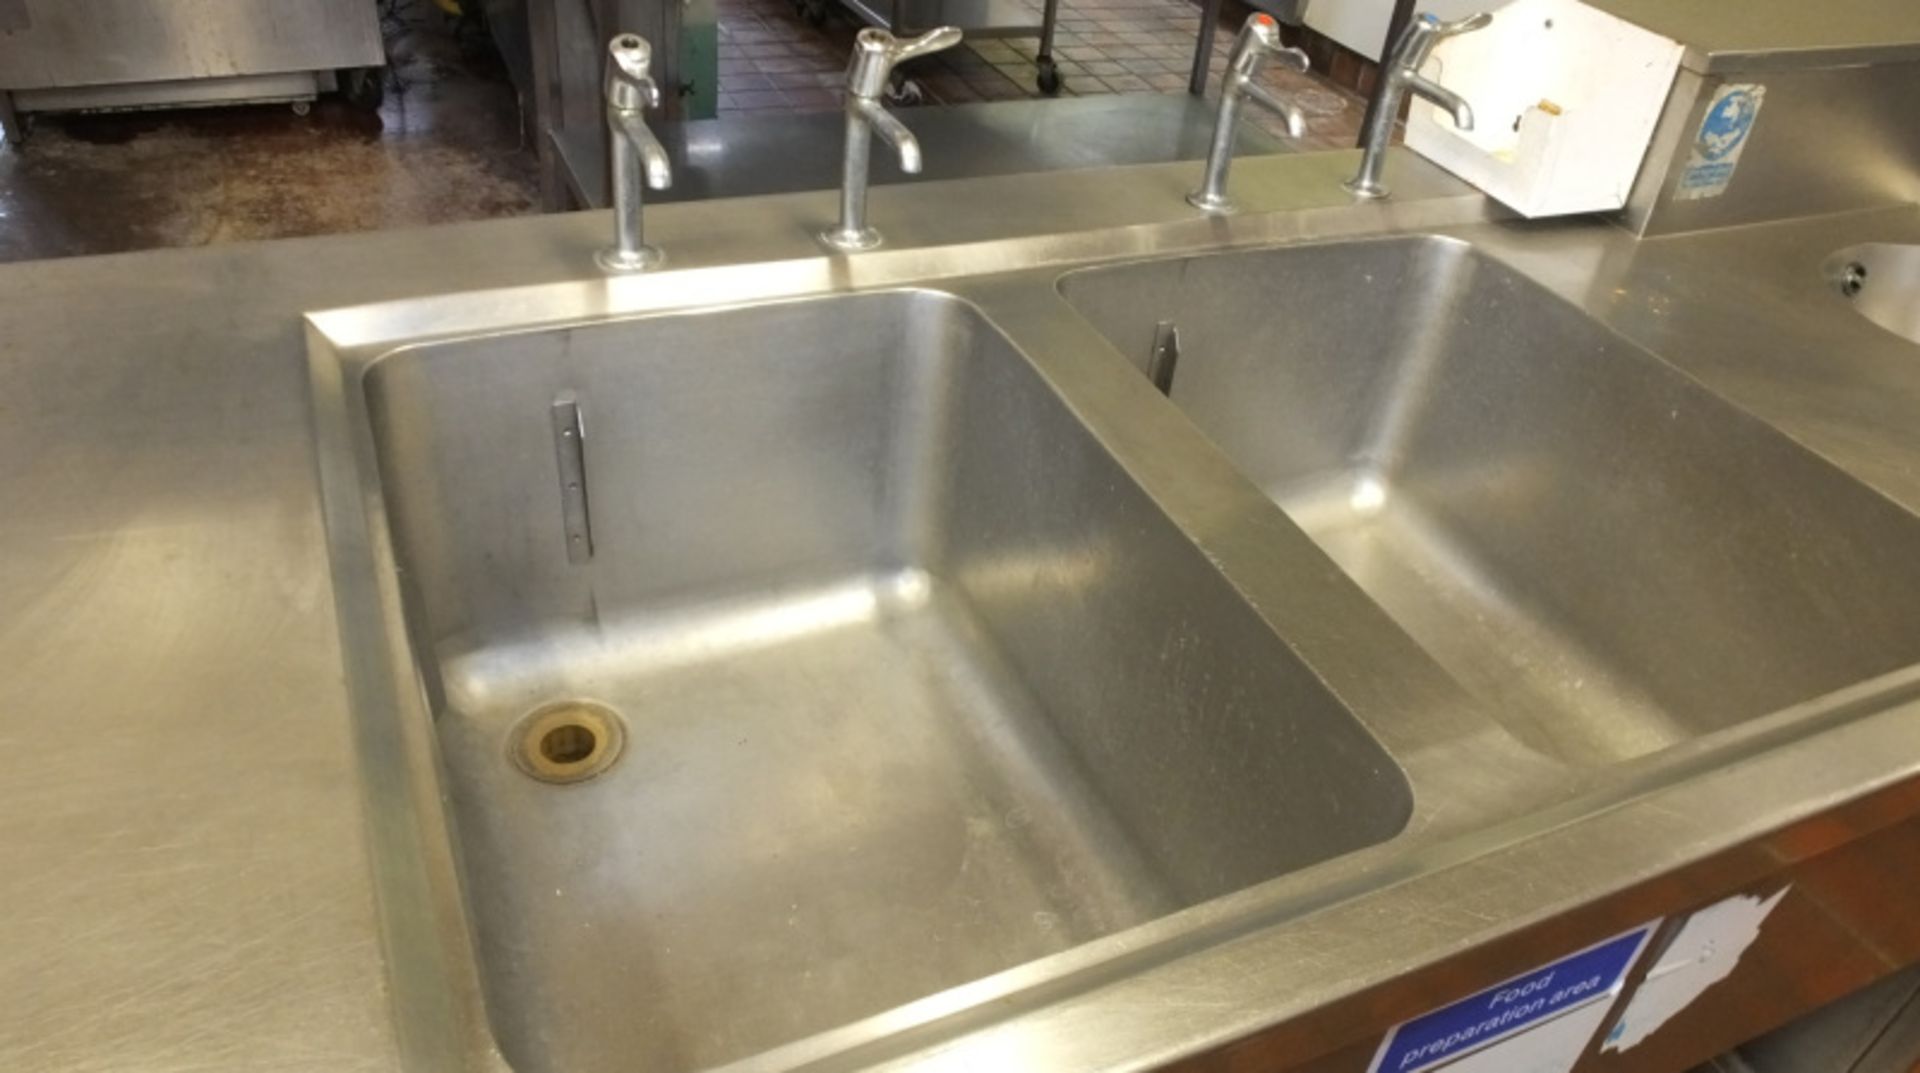 Stainless Steel Double Sink Unit with waste - L2380 x D840 x H1090mm - Image 3 of 5